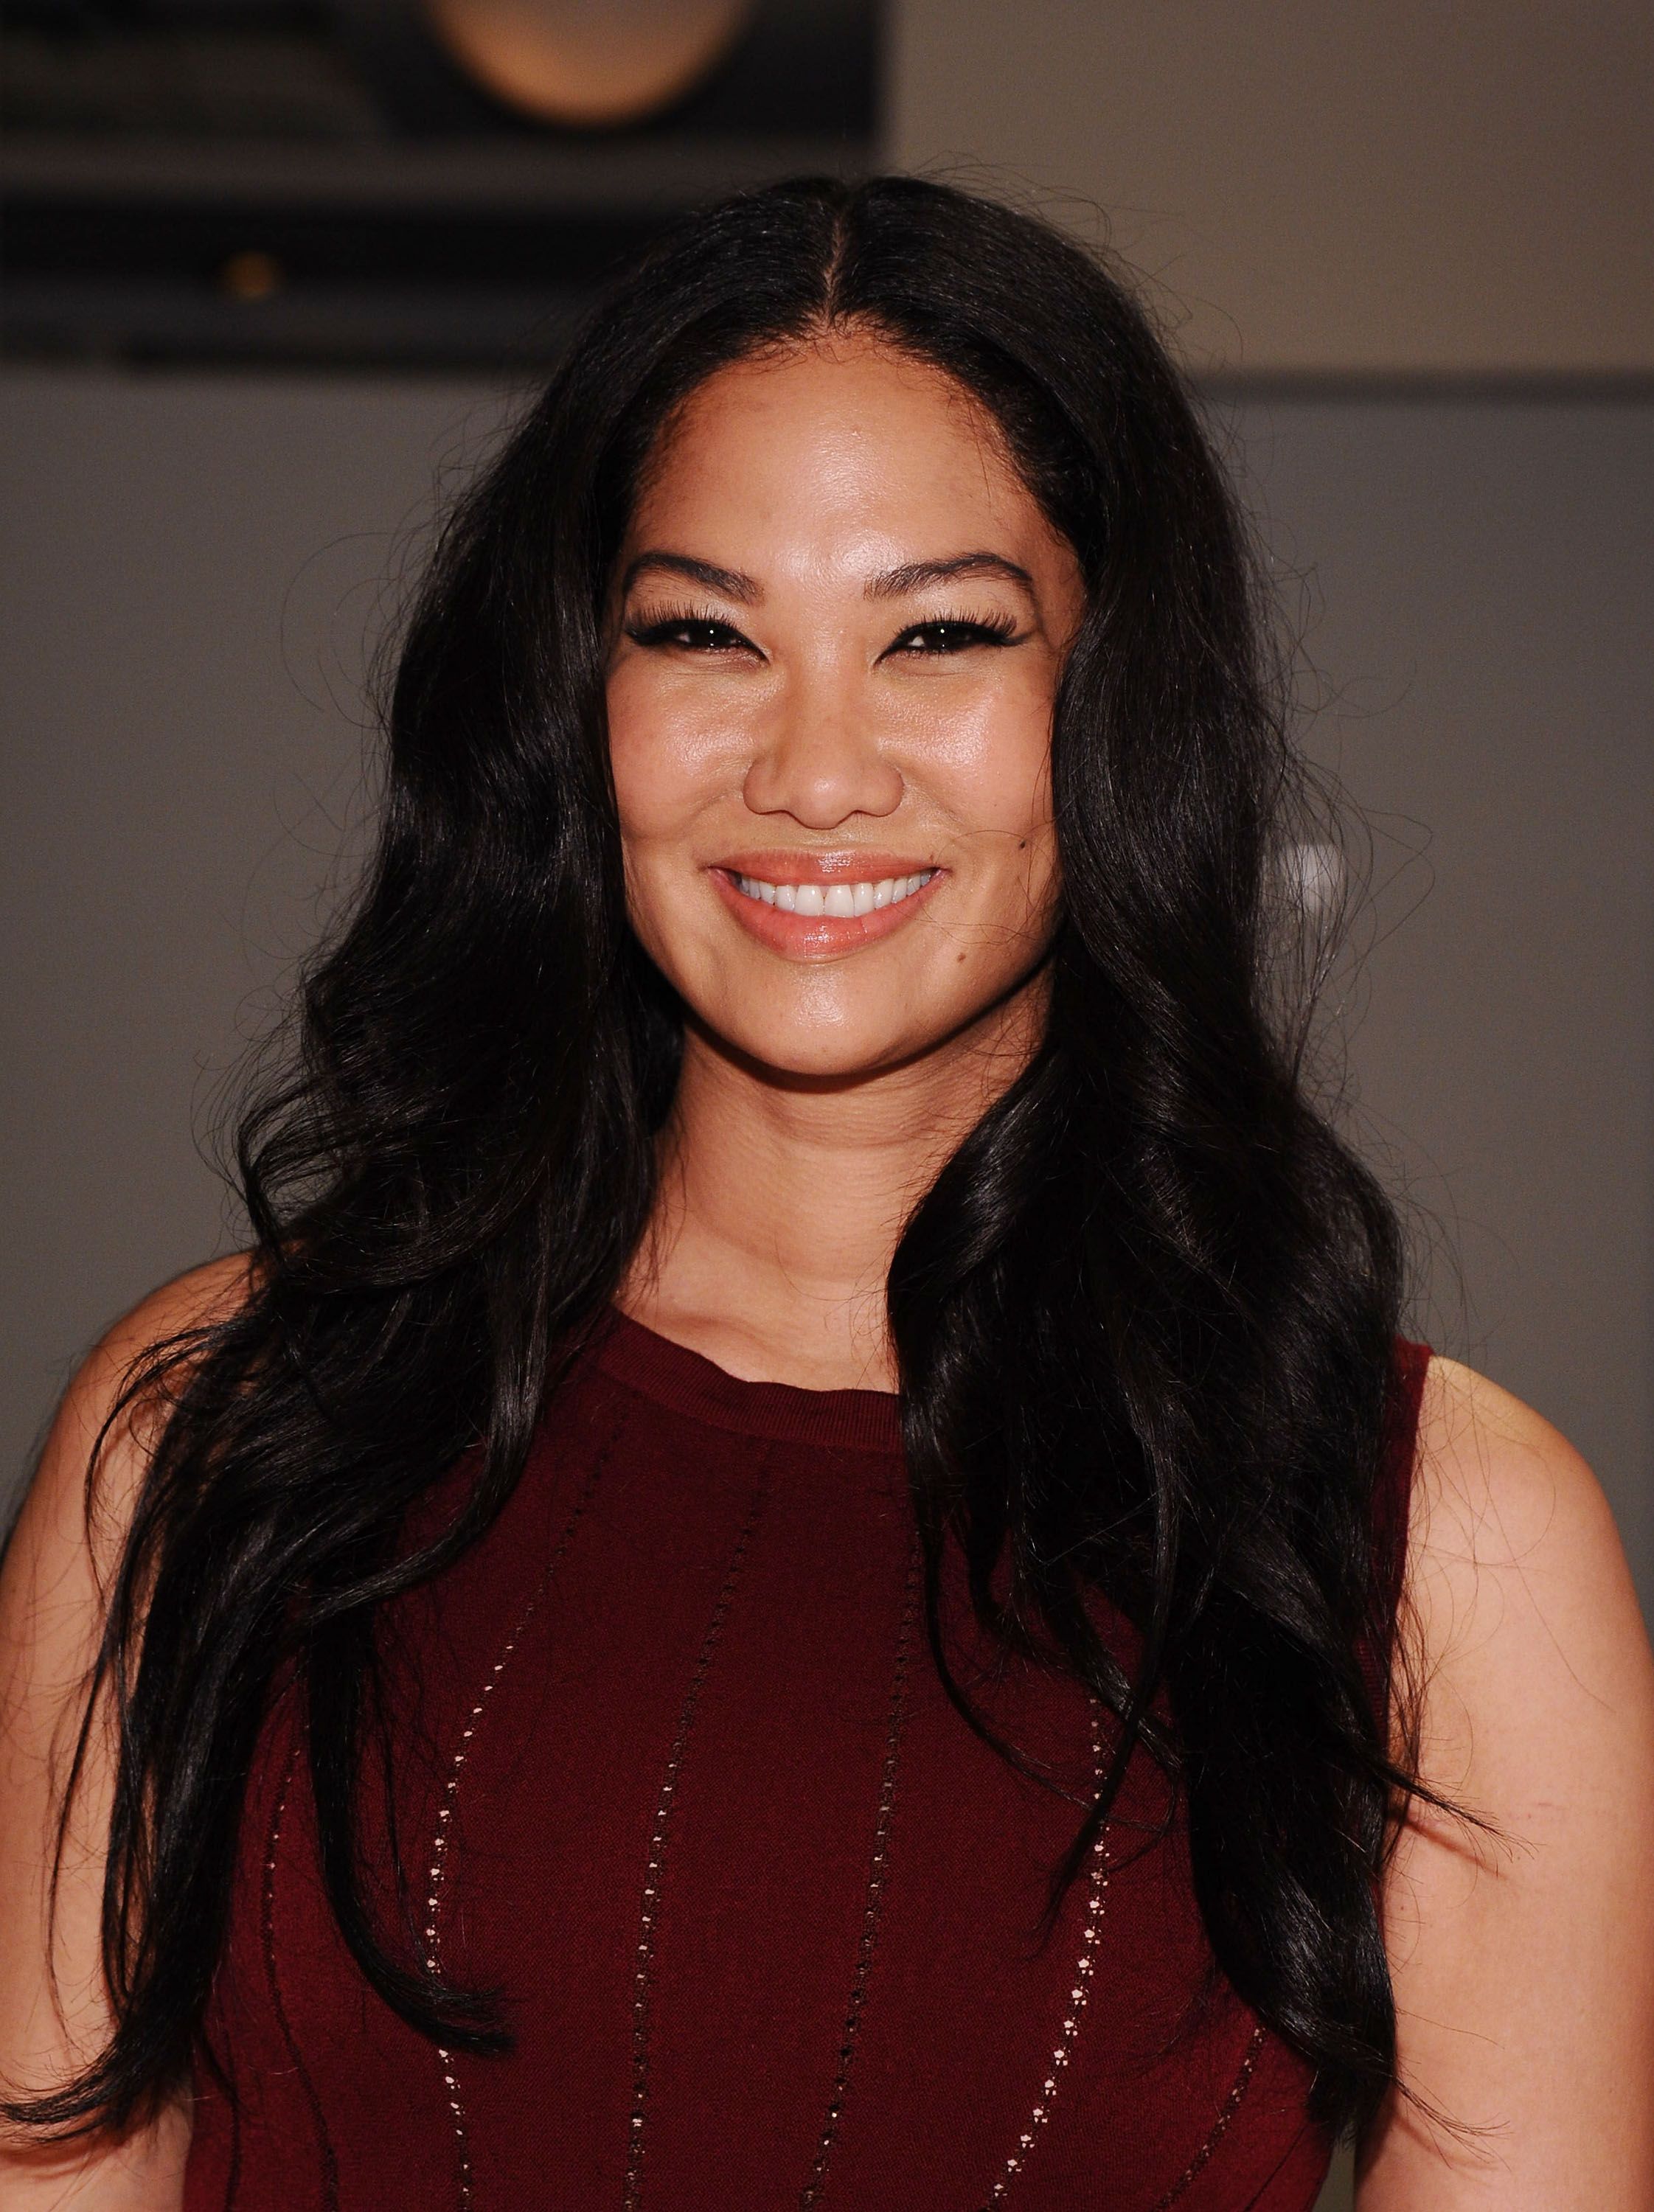 Kimora Lee Simmons at the Argyleculture By Russell Simmons fashion show during Mercedes-Benz Fashion Week Spring 2015 on September 5, 2014 in New York City. | Source: Getty Images